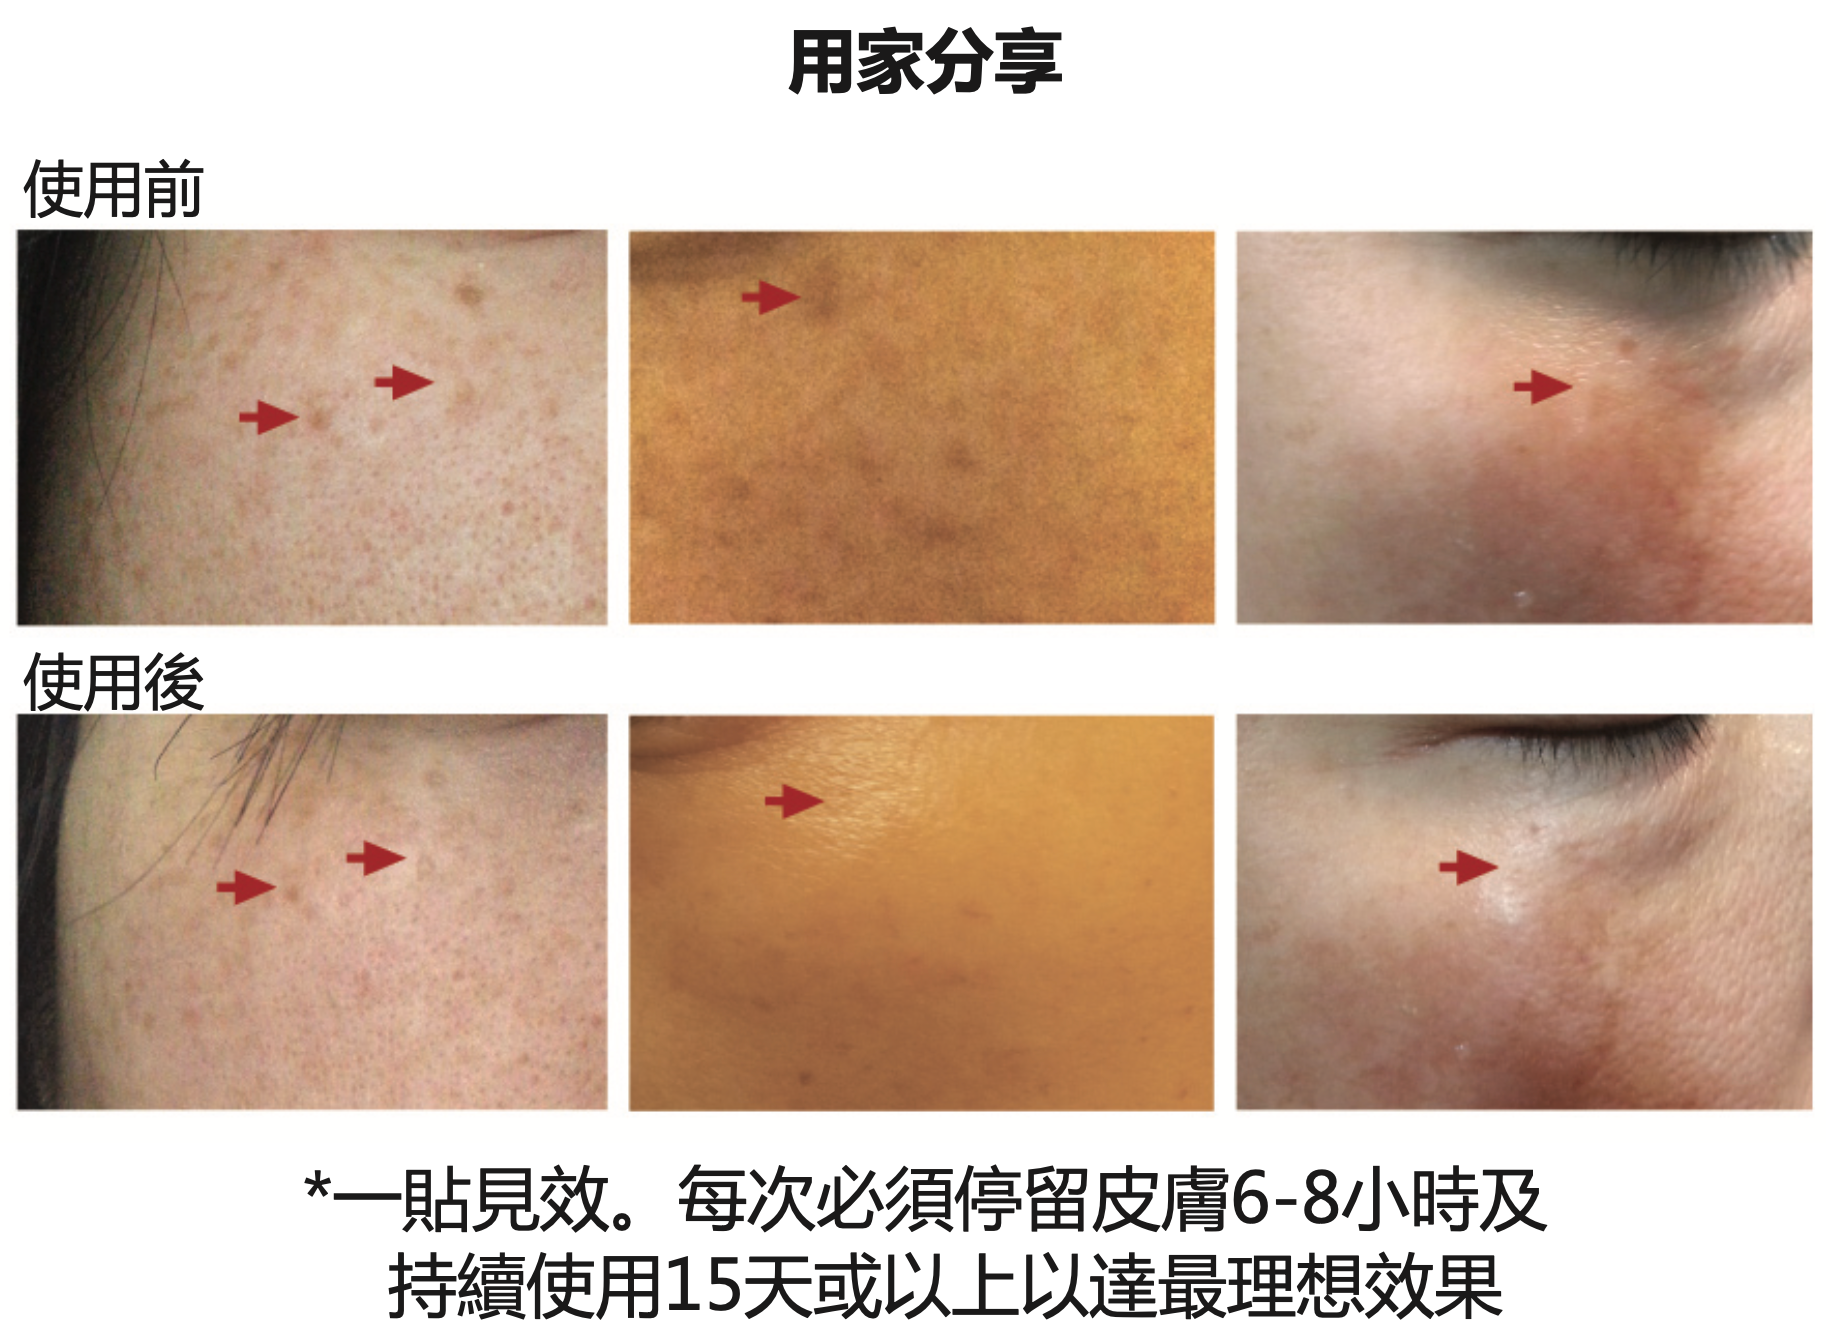 Methode Cholley 去斑追擊貼 CHOLLEY® CLEARING PATCHES (10 Patches)